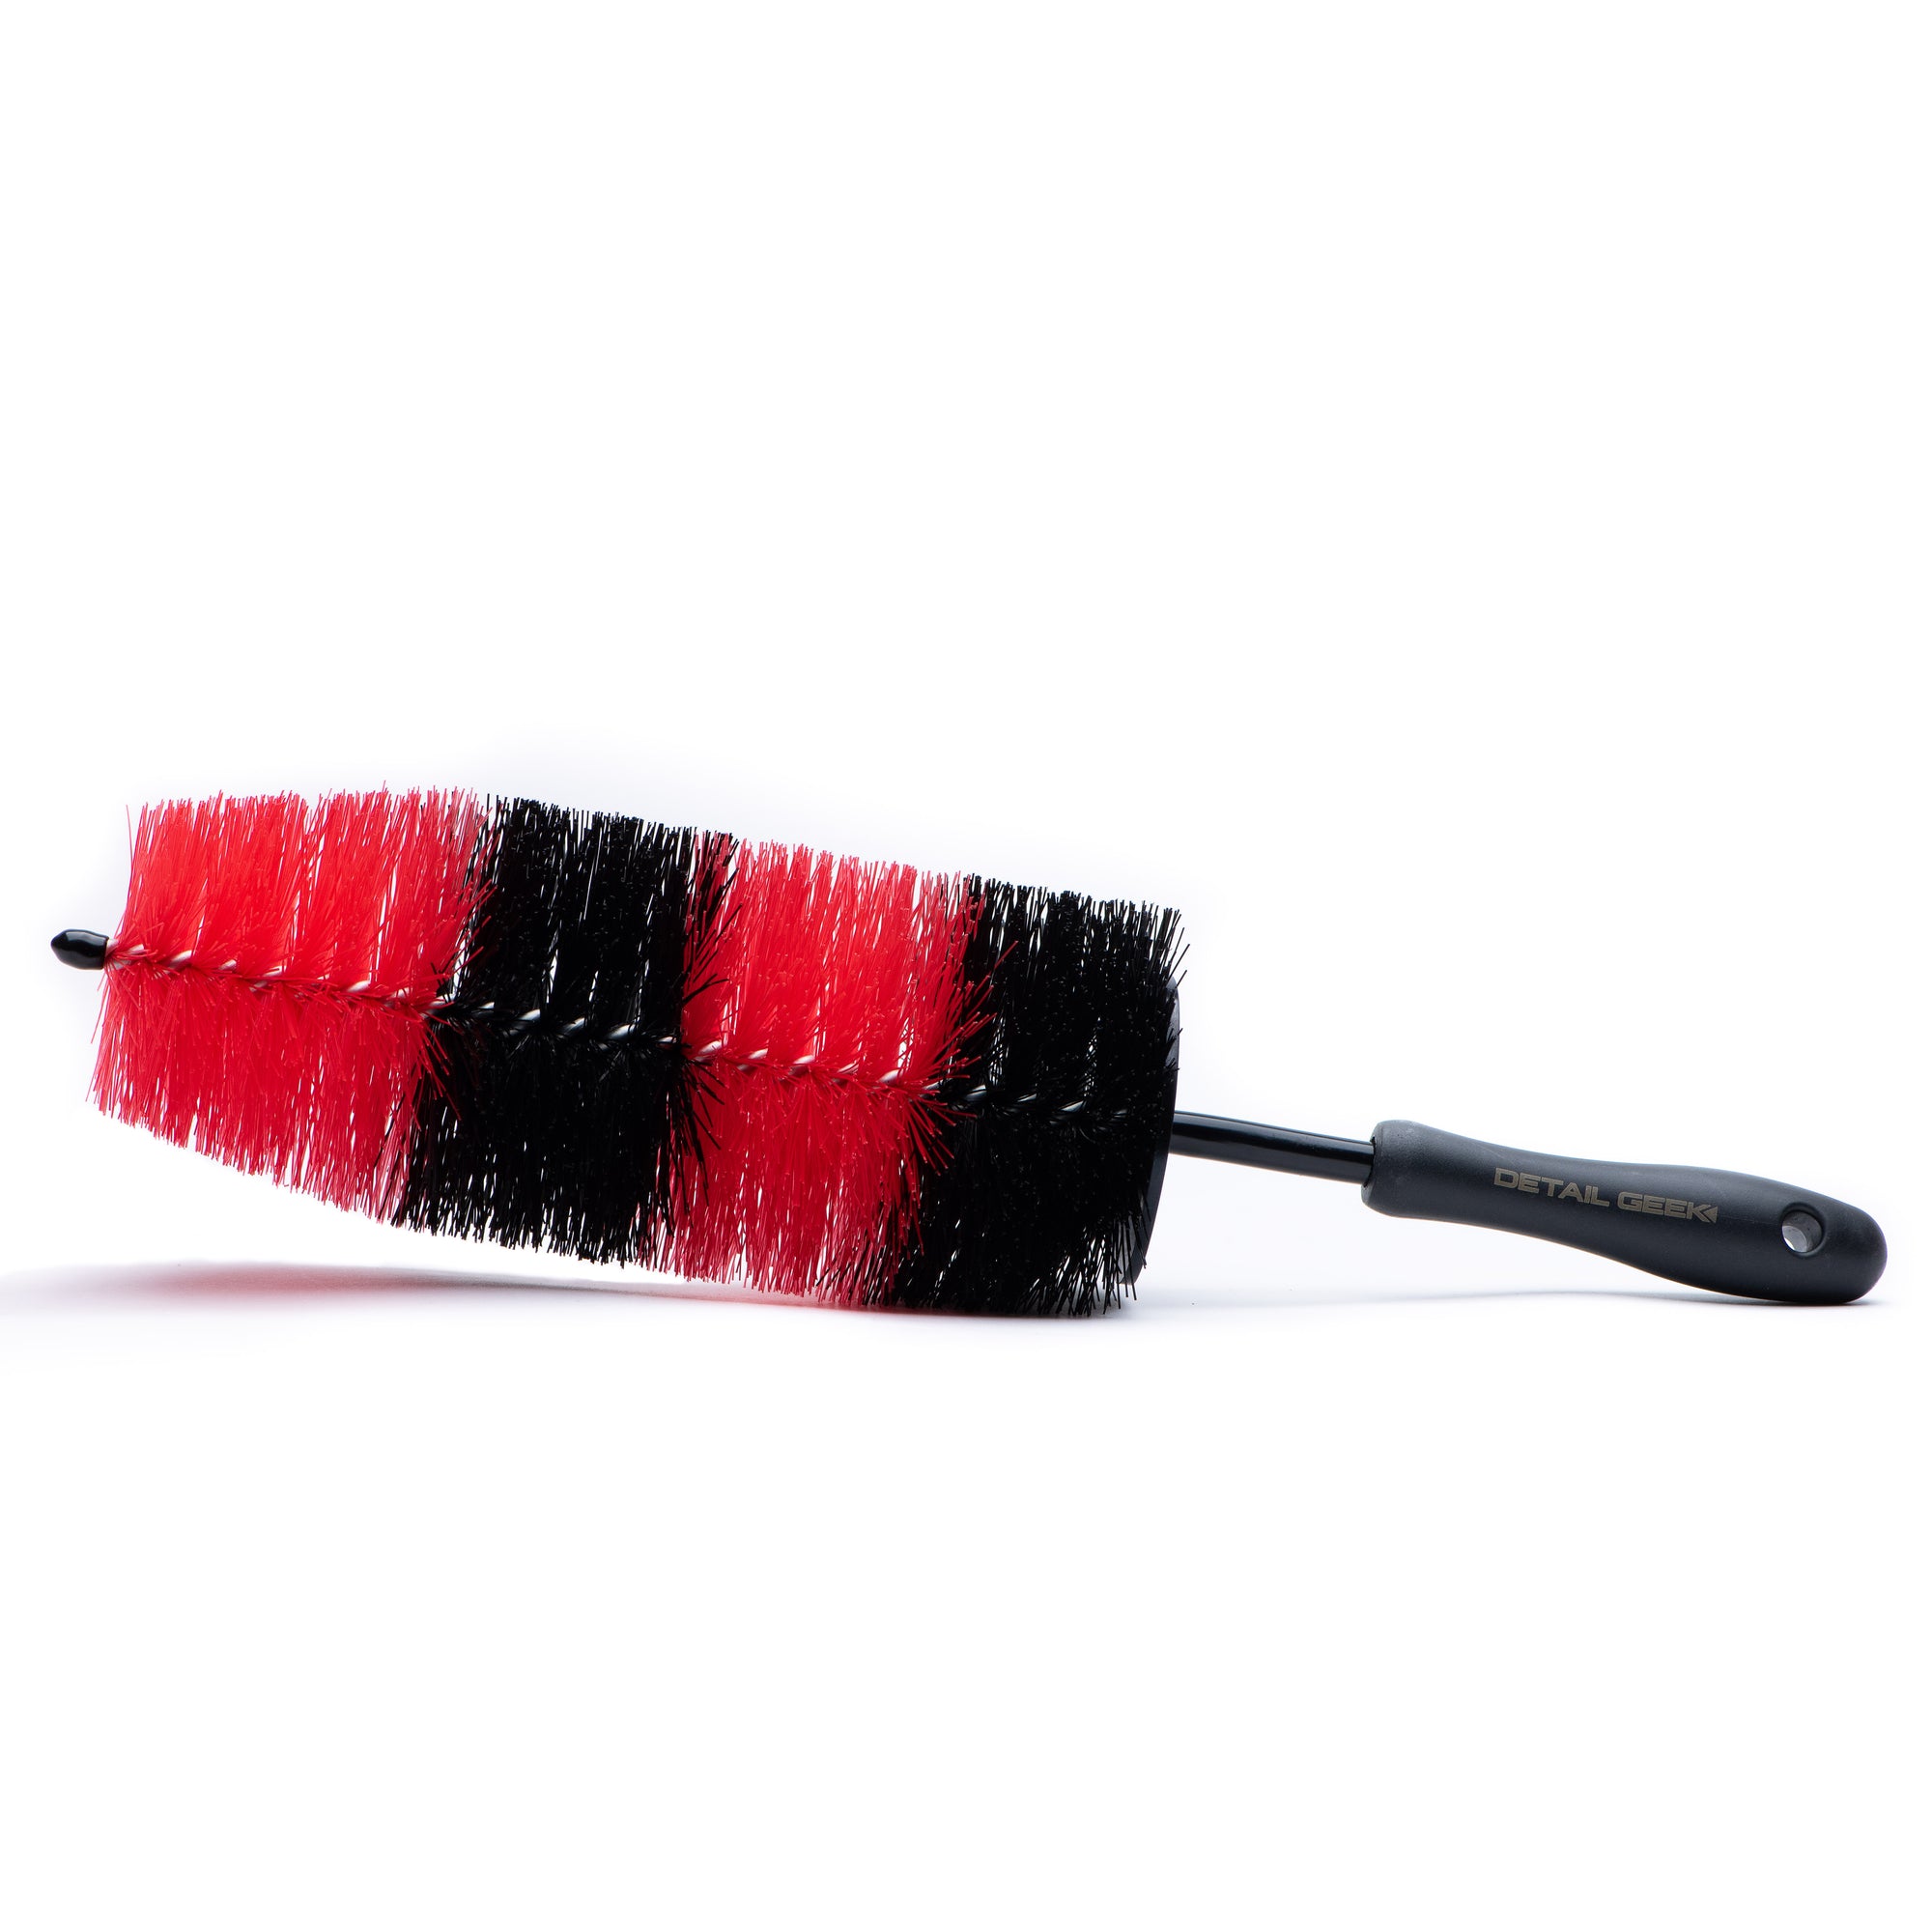 Detailers Preference Contour Tire Brush - Car Dusters & Detailing Brushes